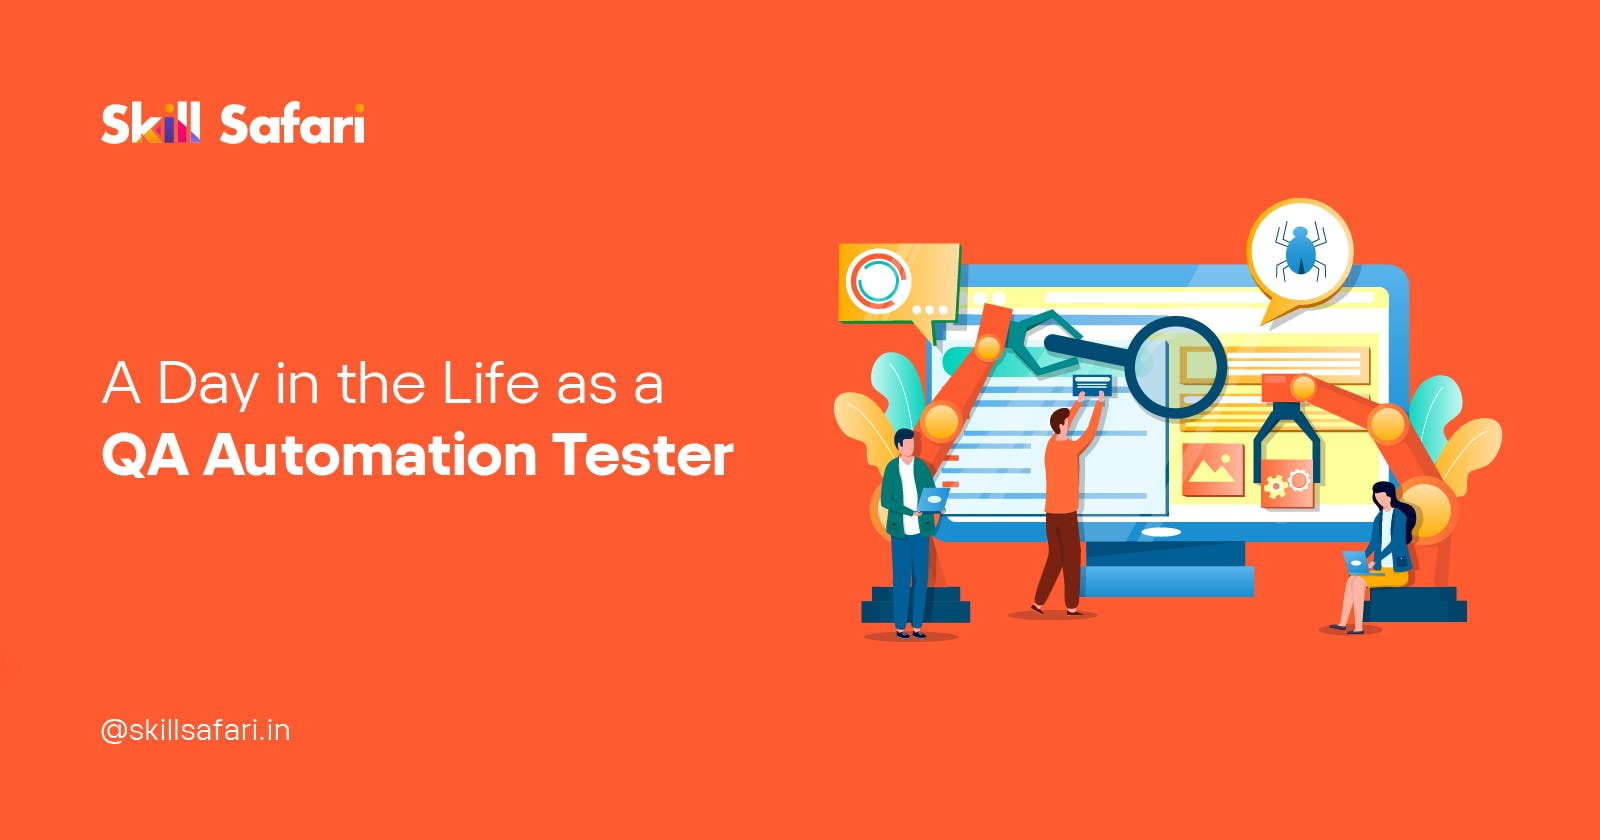 A Day in the Life as a QA Automation Tester